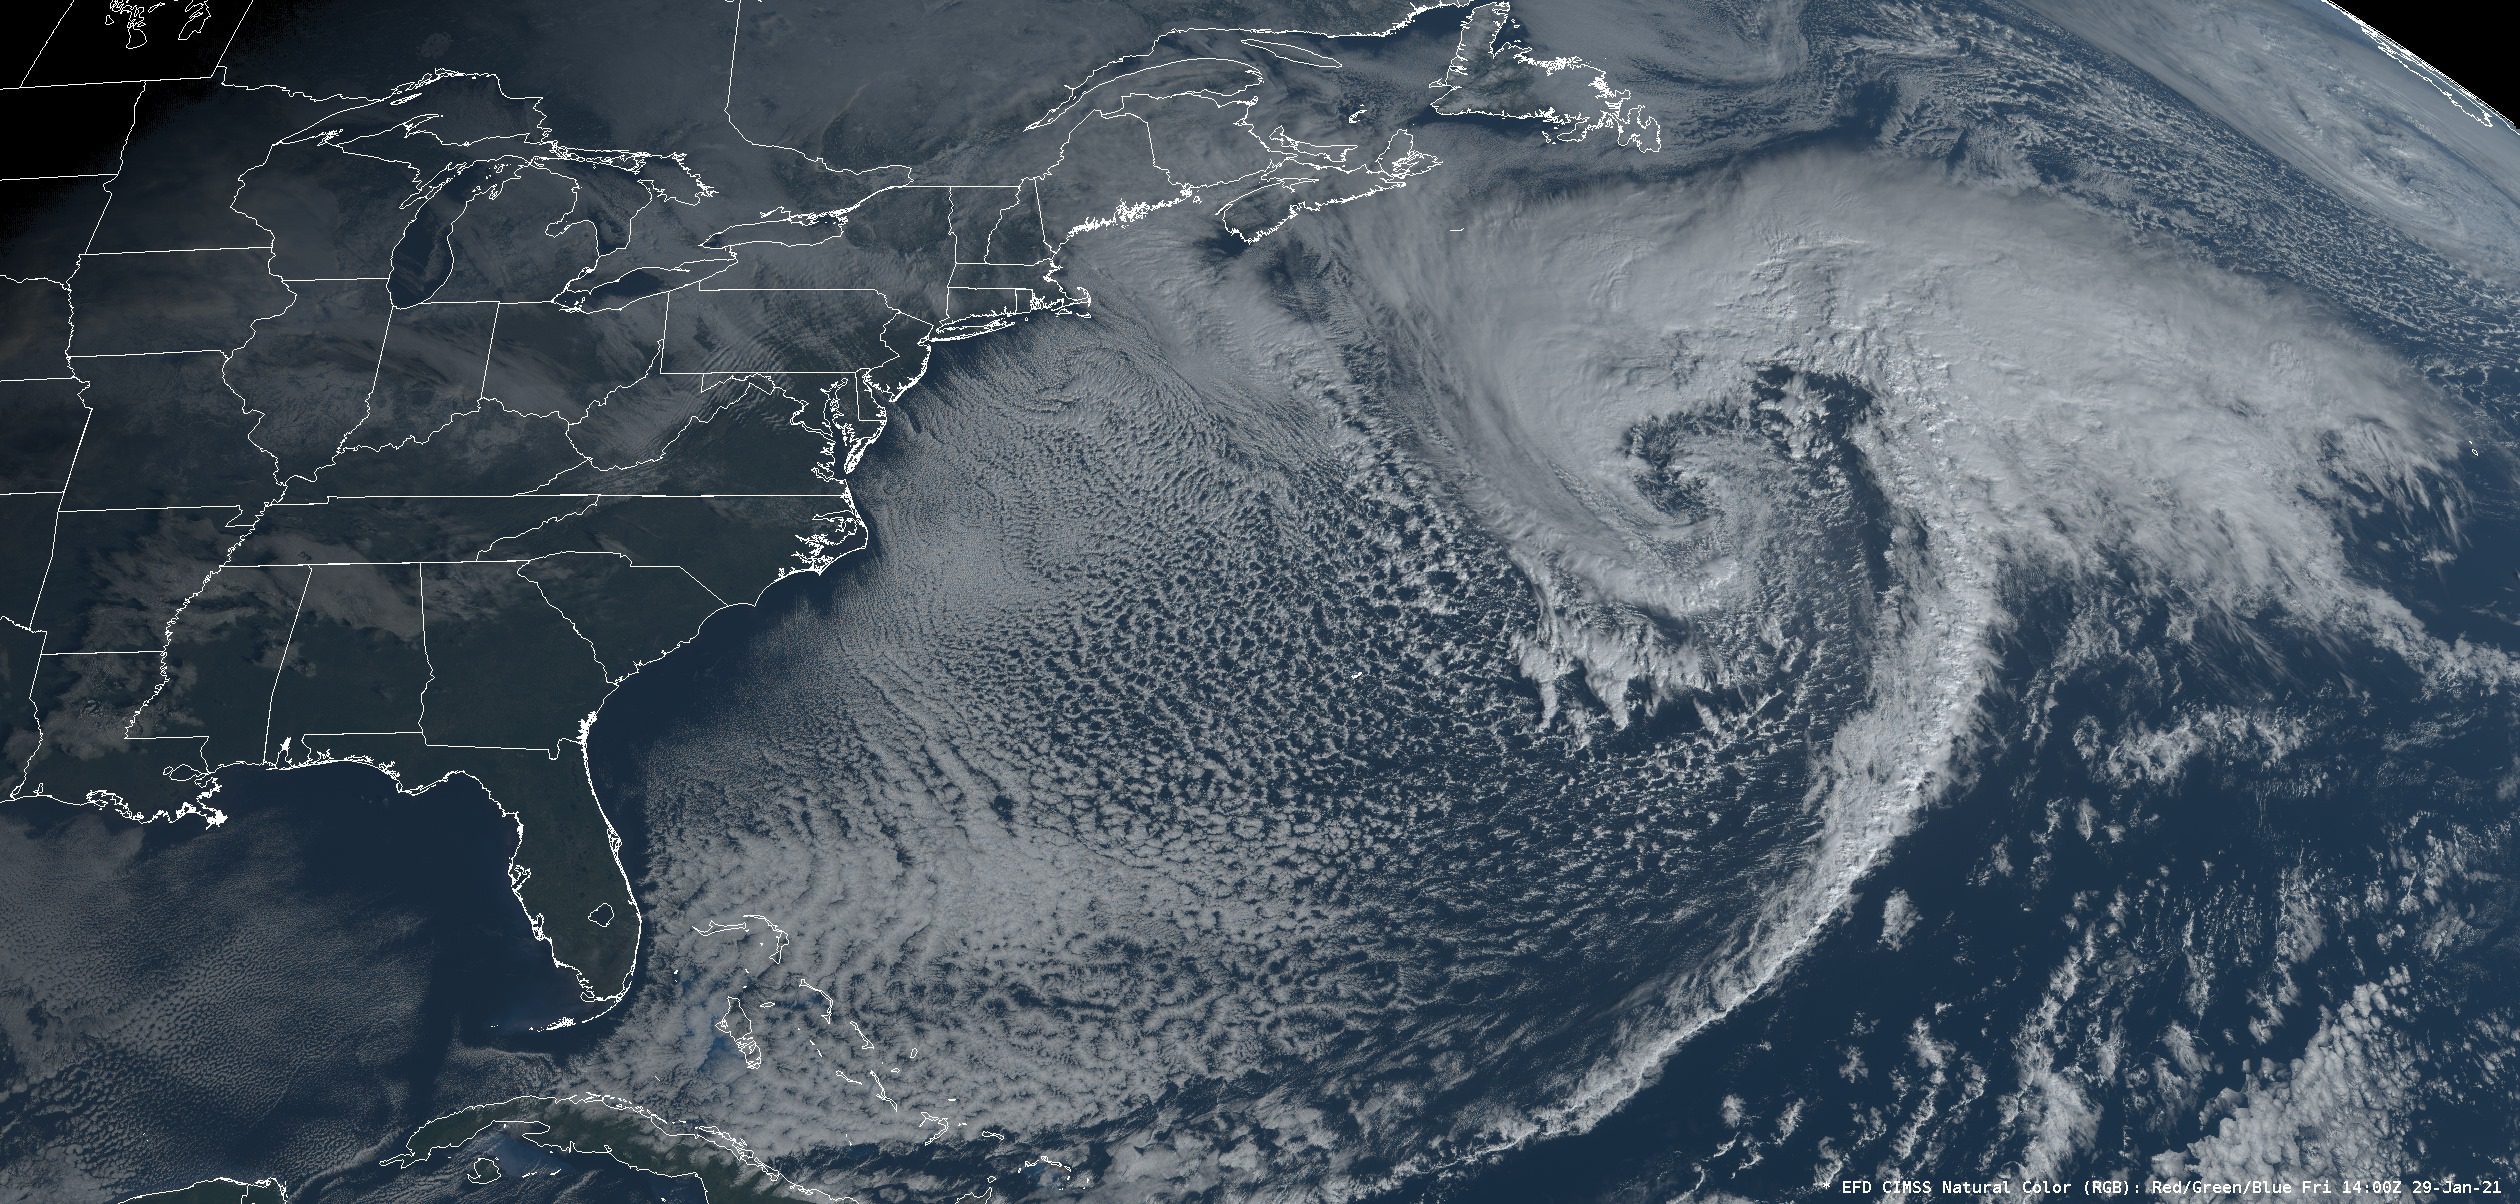 North Atlantic Storm Forecasted to Produce Massive 60-Foot Seas